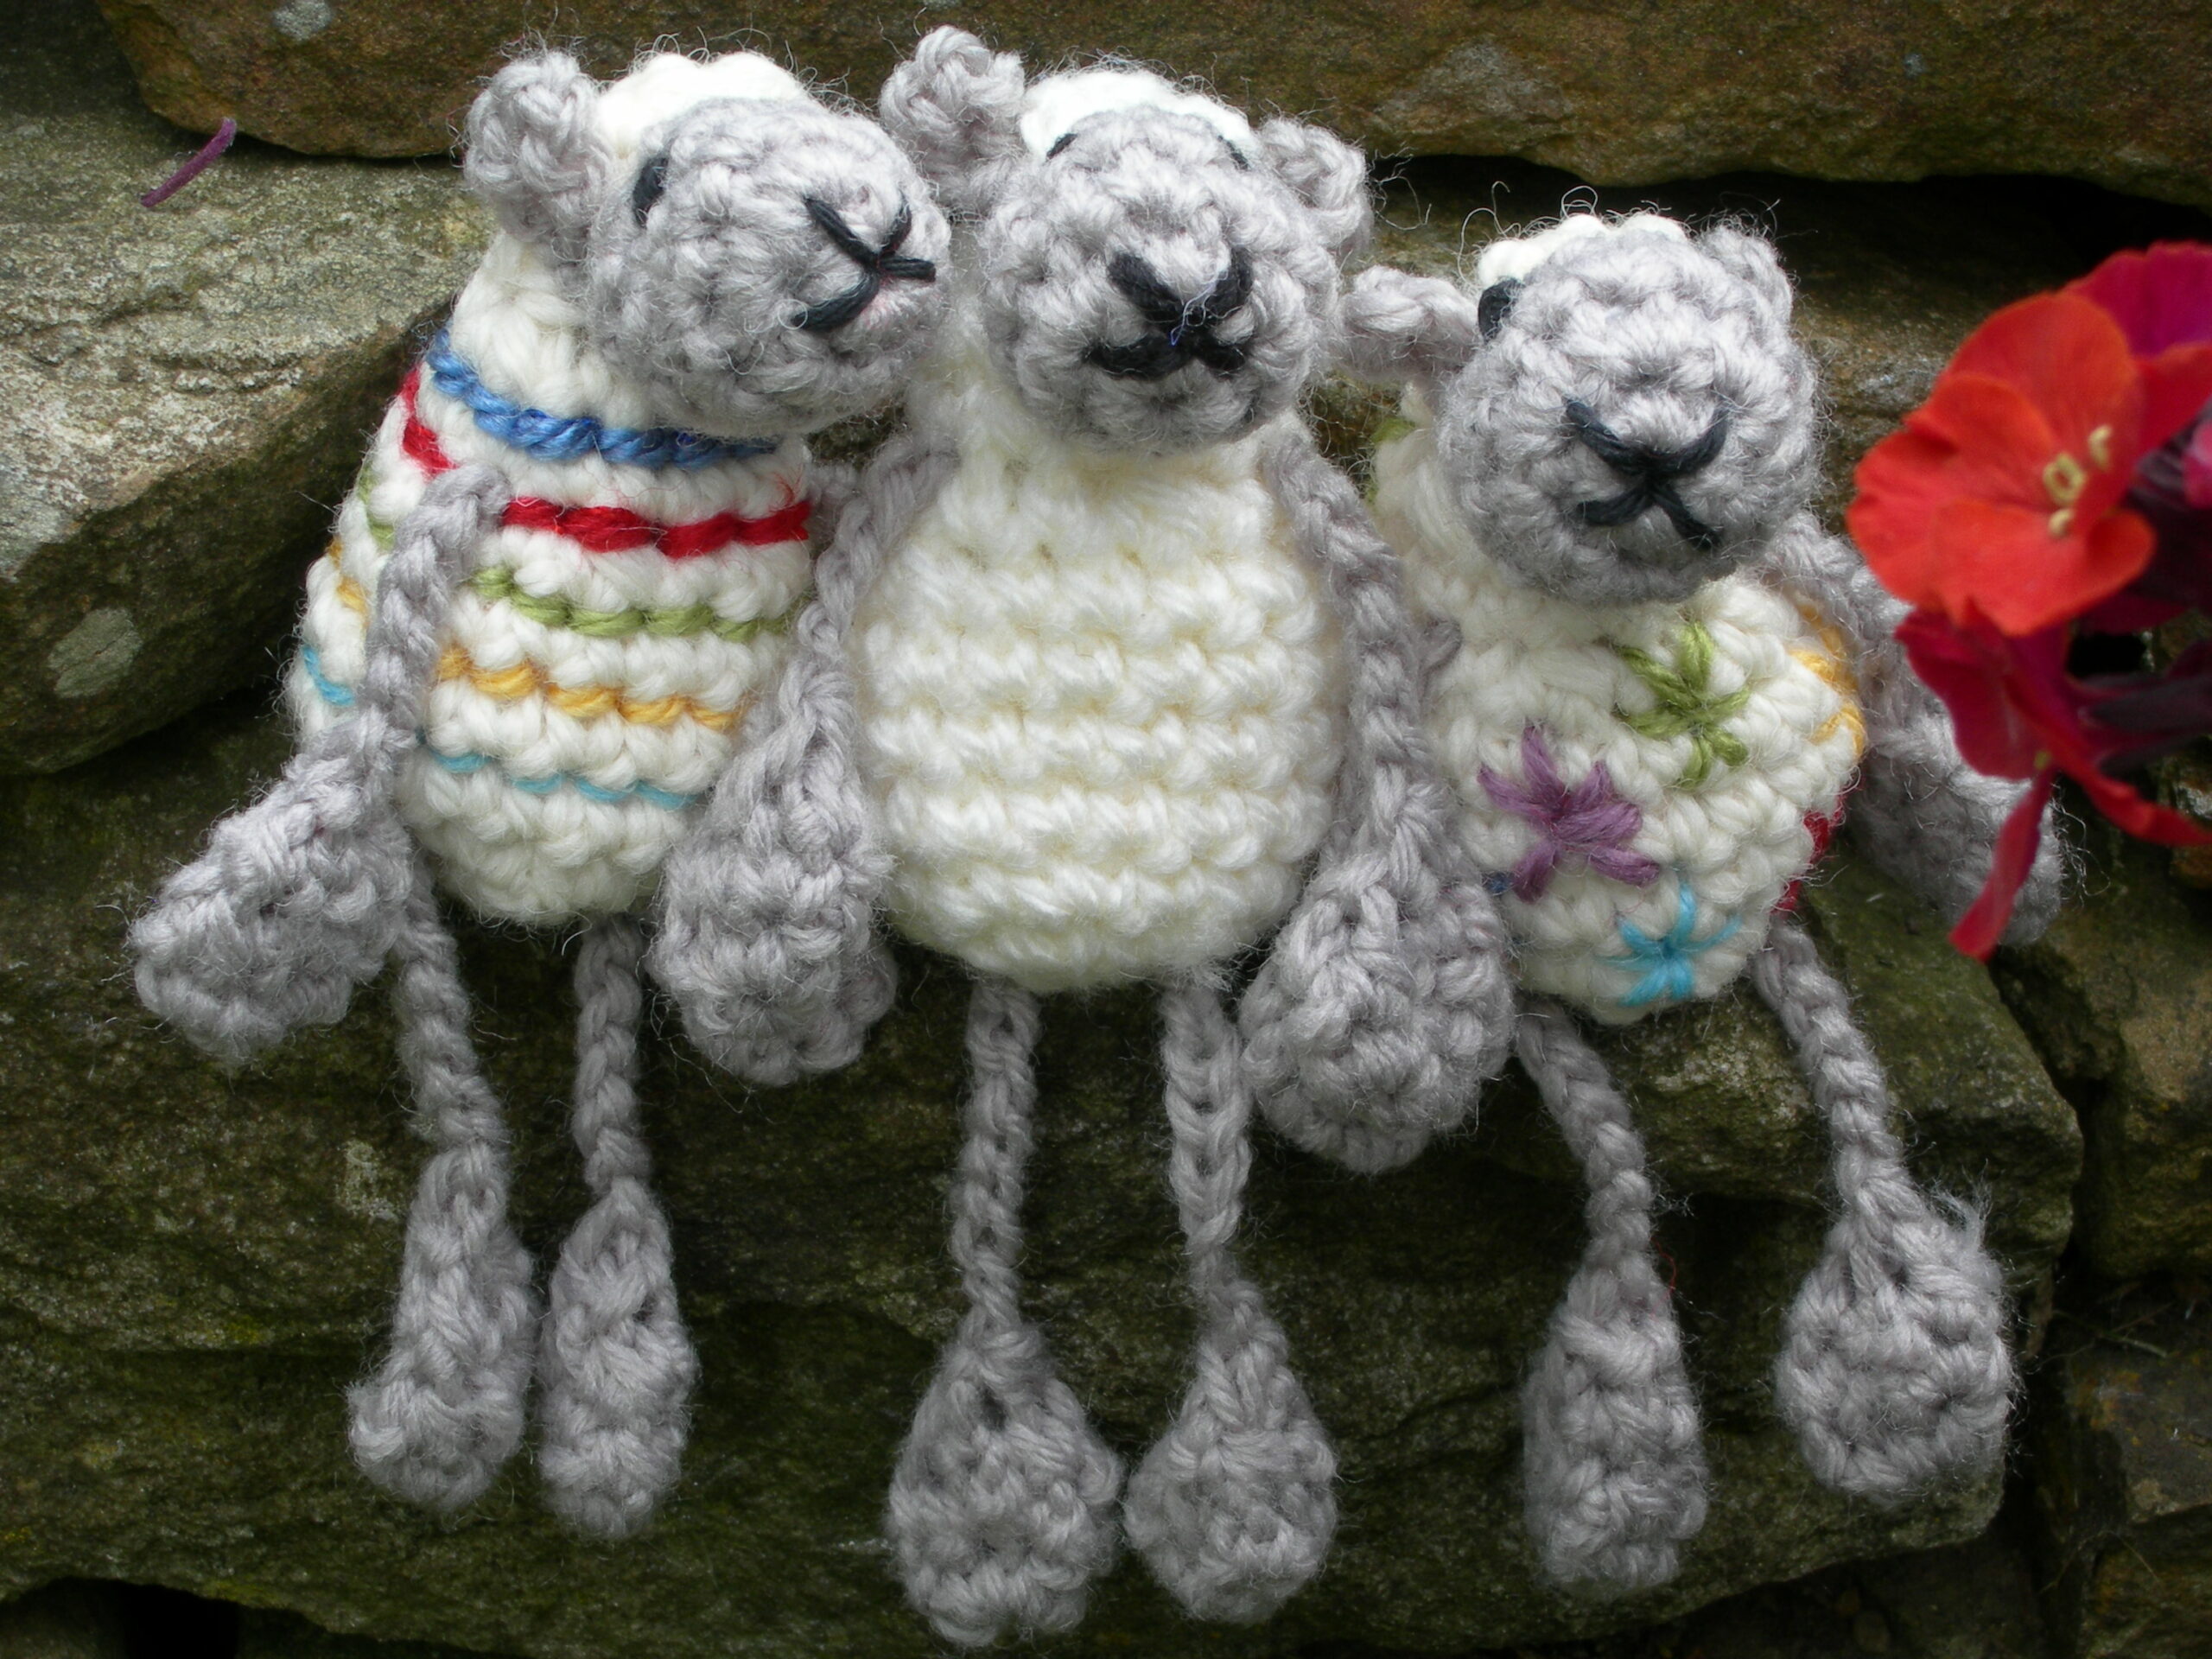 Yan, Tan and Tethera, the dangly crocheted sheep from Yarndale